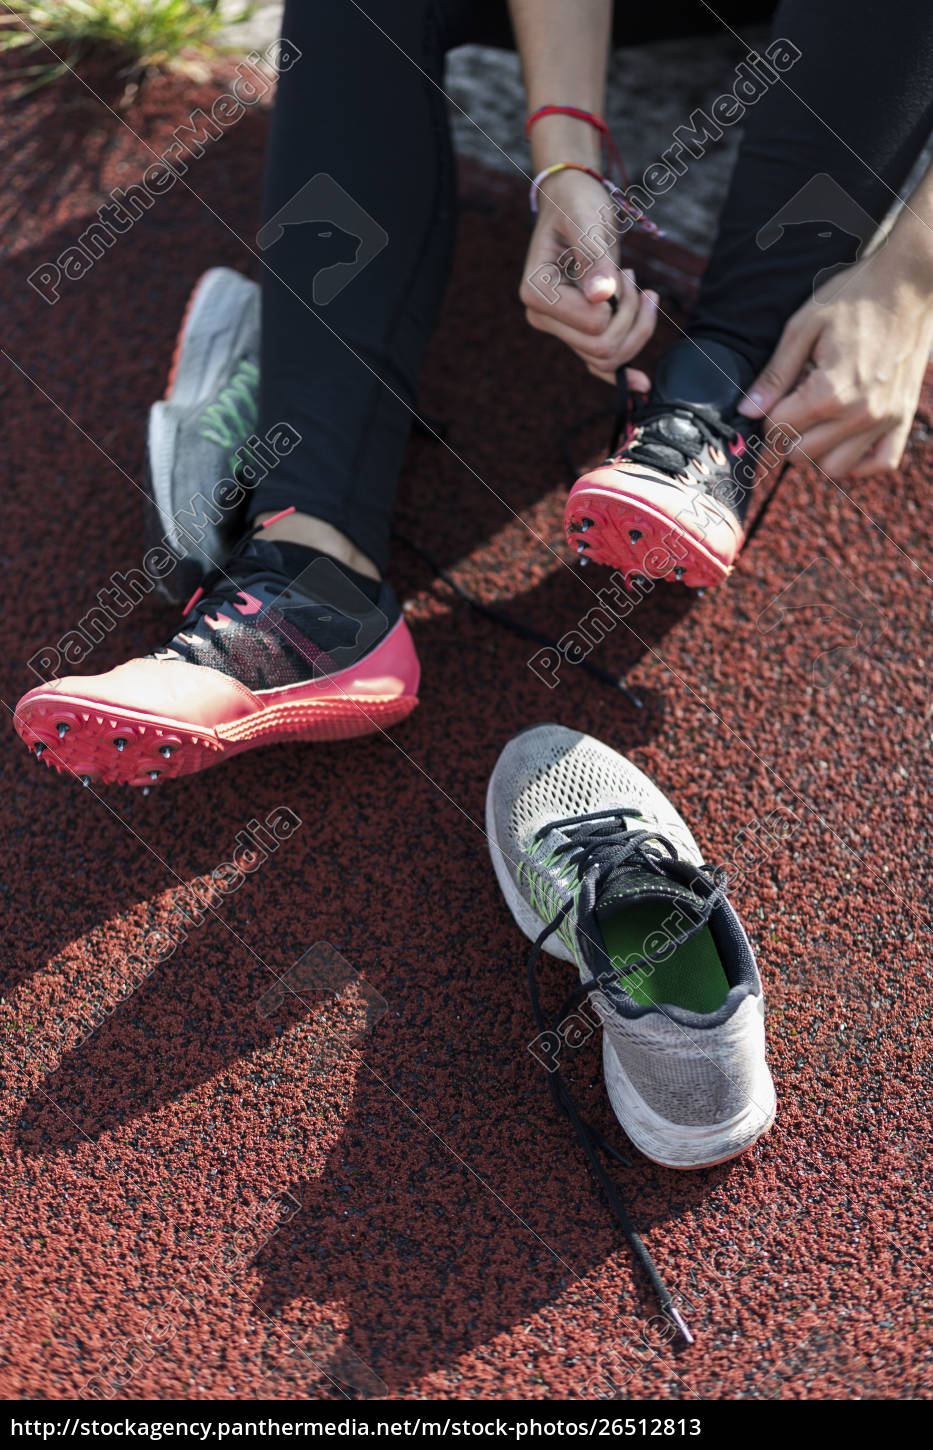 Teenage Girl Changing Shoes For Running Training Stock Photo Panthermedia Stock Agency